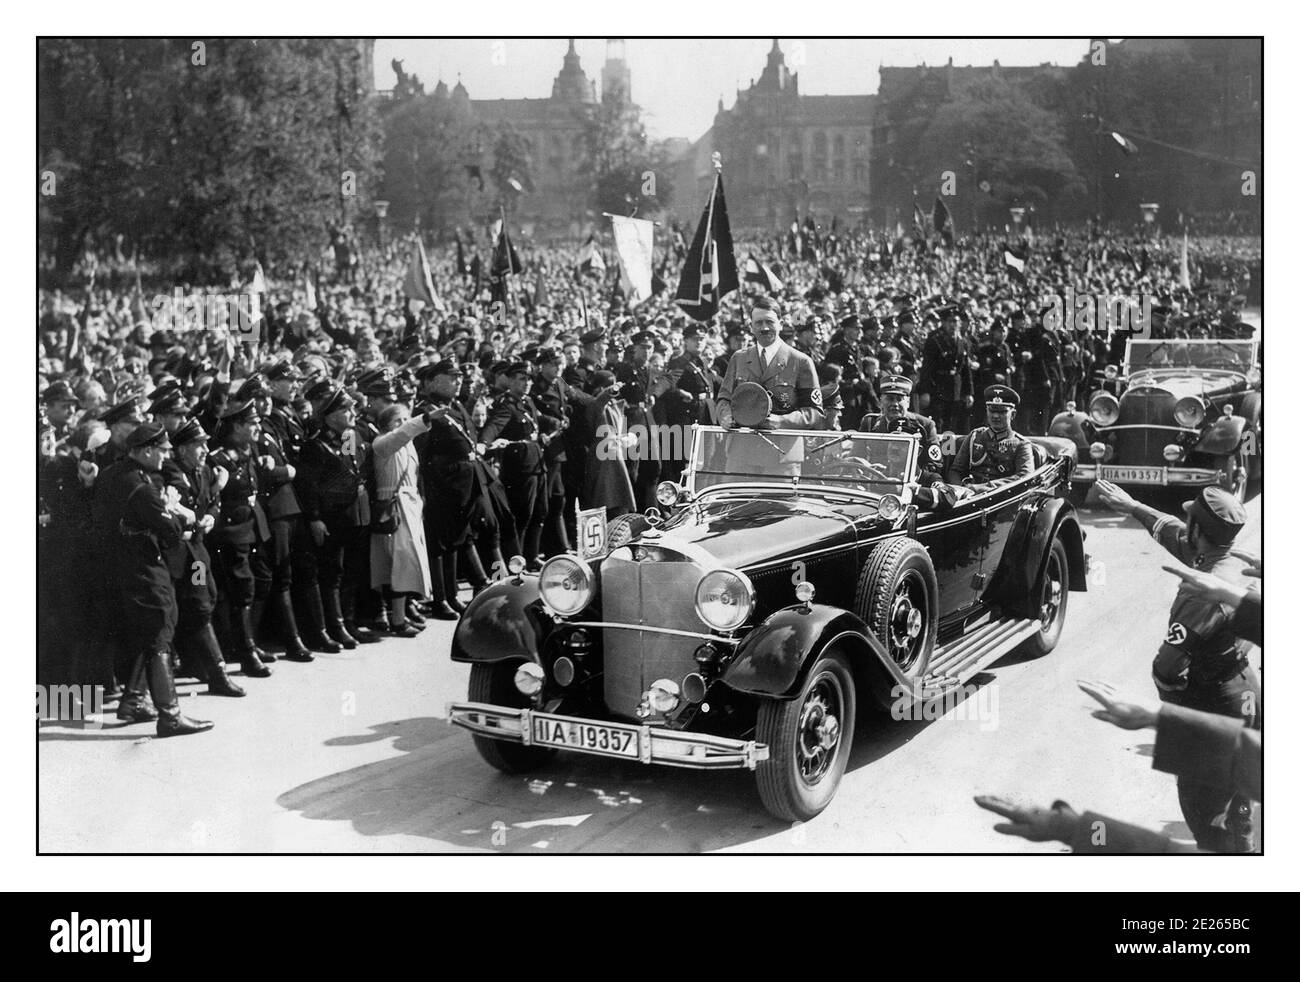 Vintage Adolf Hitler Nazi Führer German Leader Parade with motorcade in open top Mercedes motorcar with ecstatic crowds waving swastika flags and saluting Heil Hitler to him and his motorcade parade 1940's Germany Stock Photo